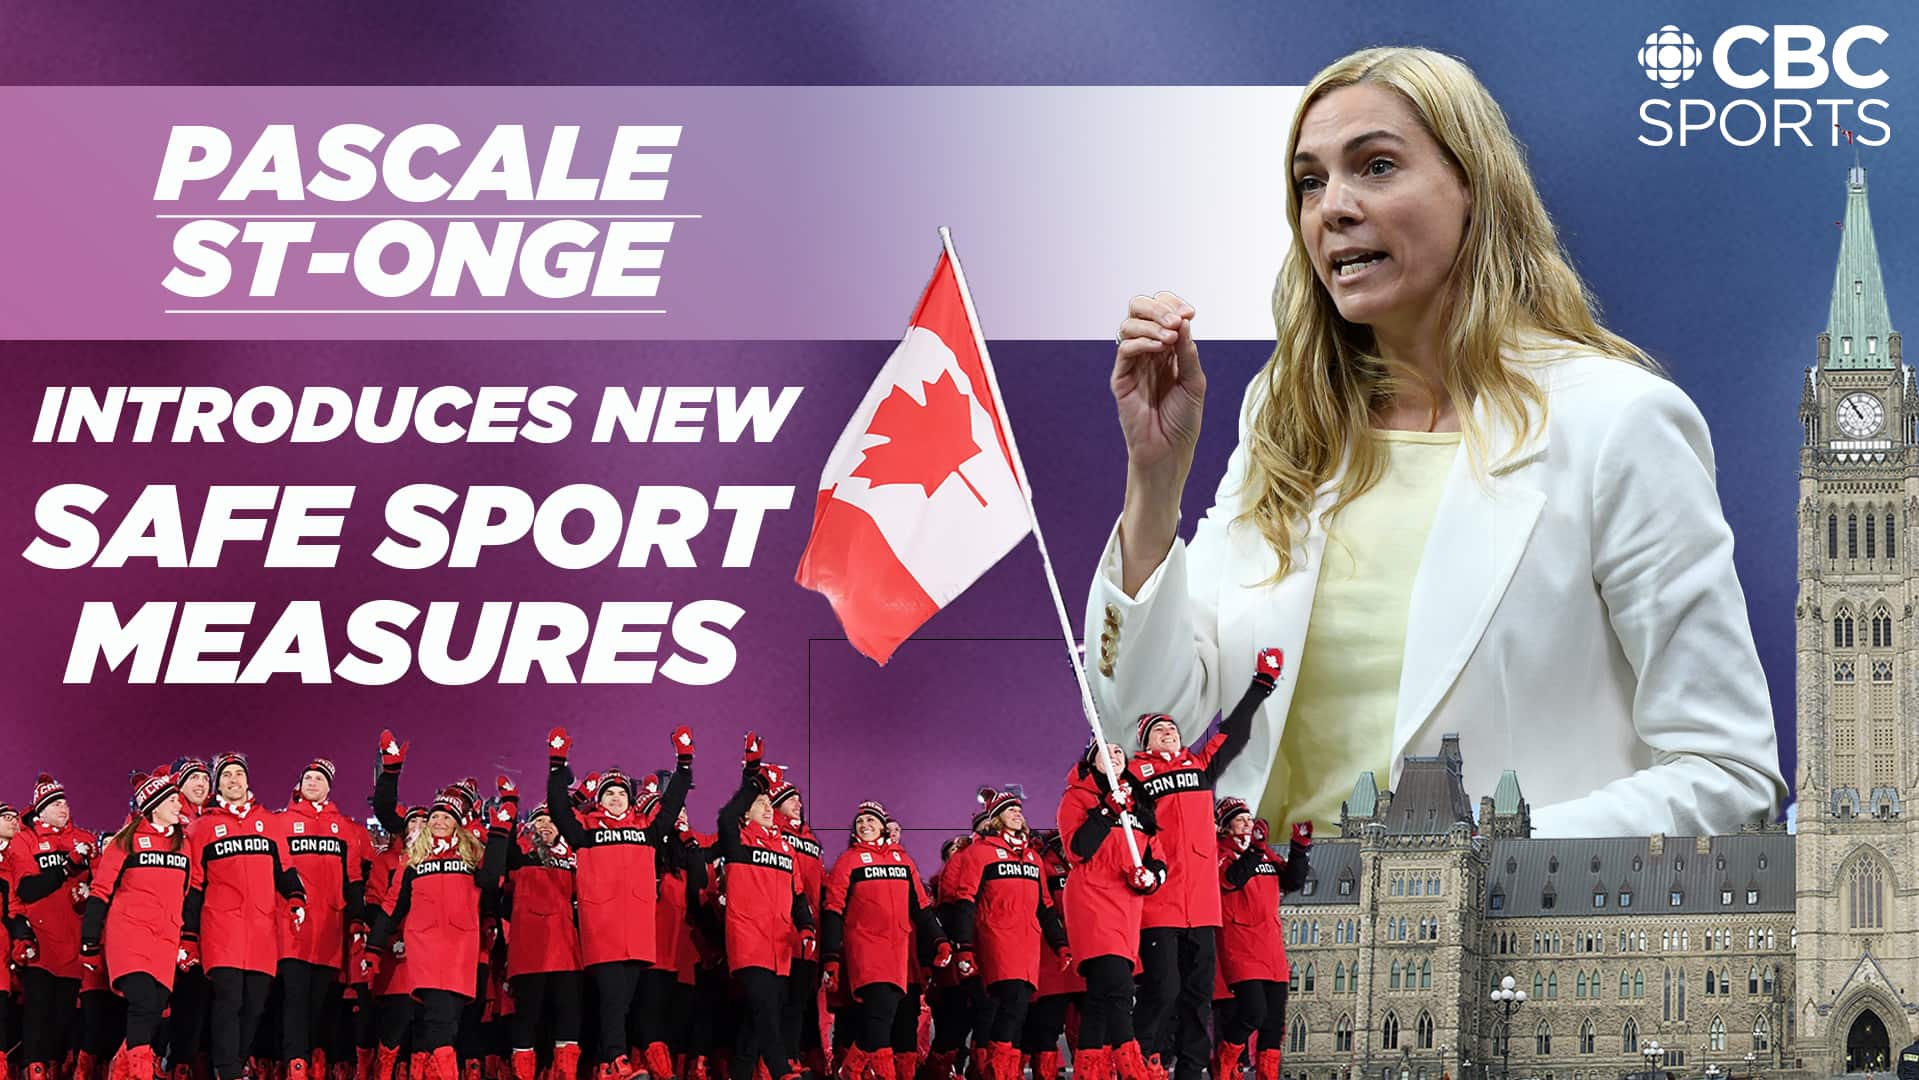 athlete activism rose to forefront of canadian sports in 2022 1